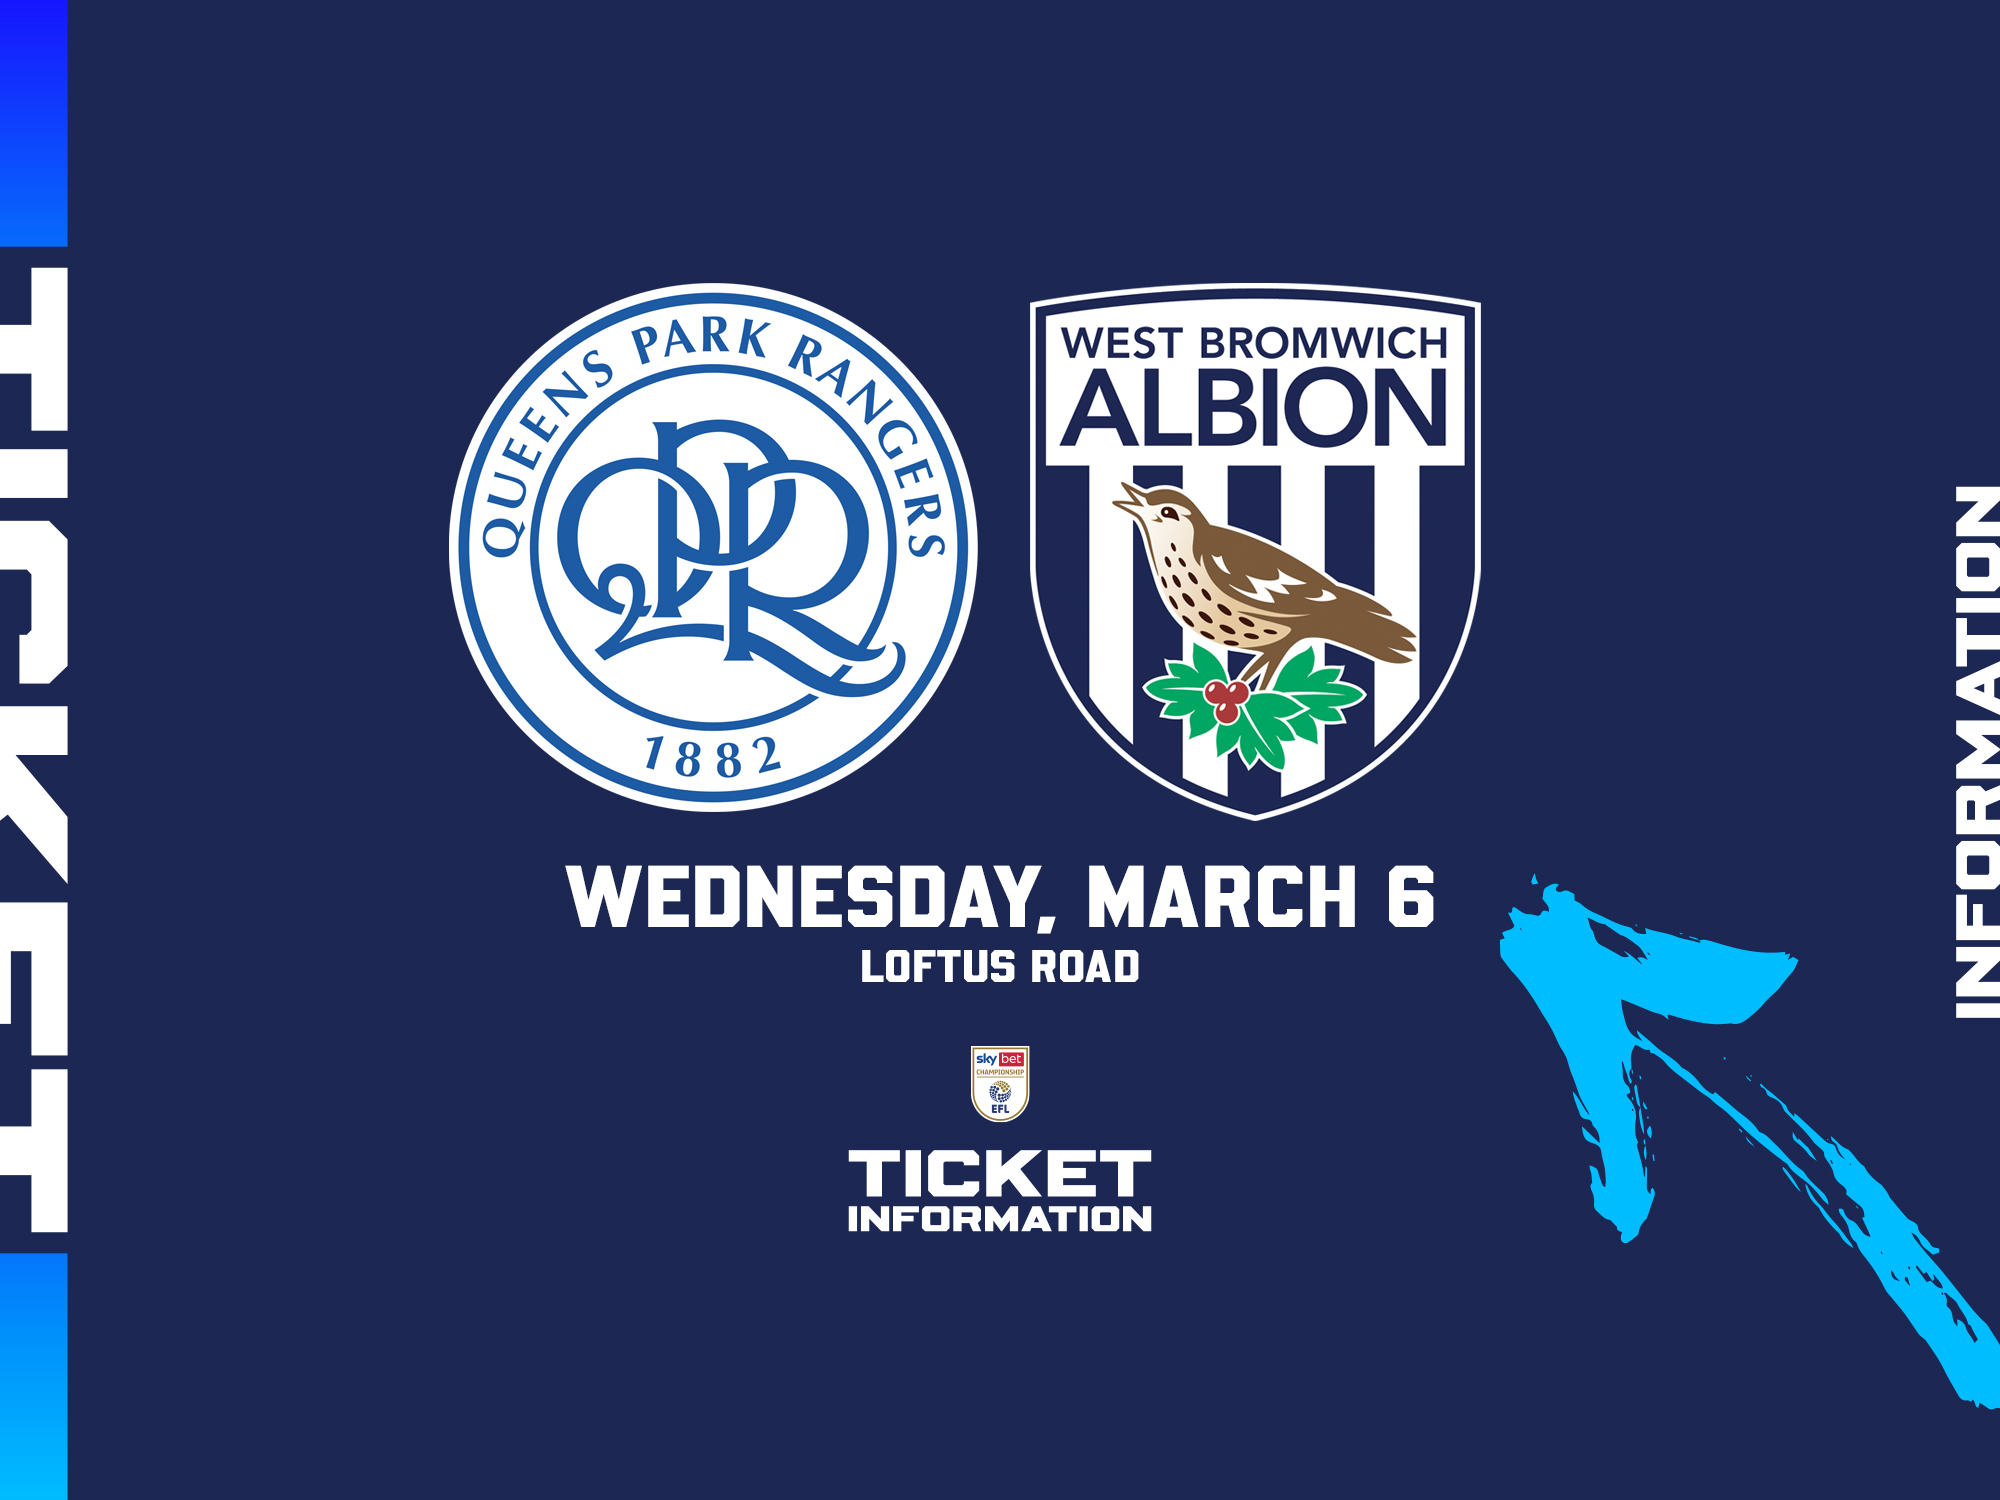 A ticket graphic displaying information for Albion's game at QPR